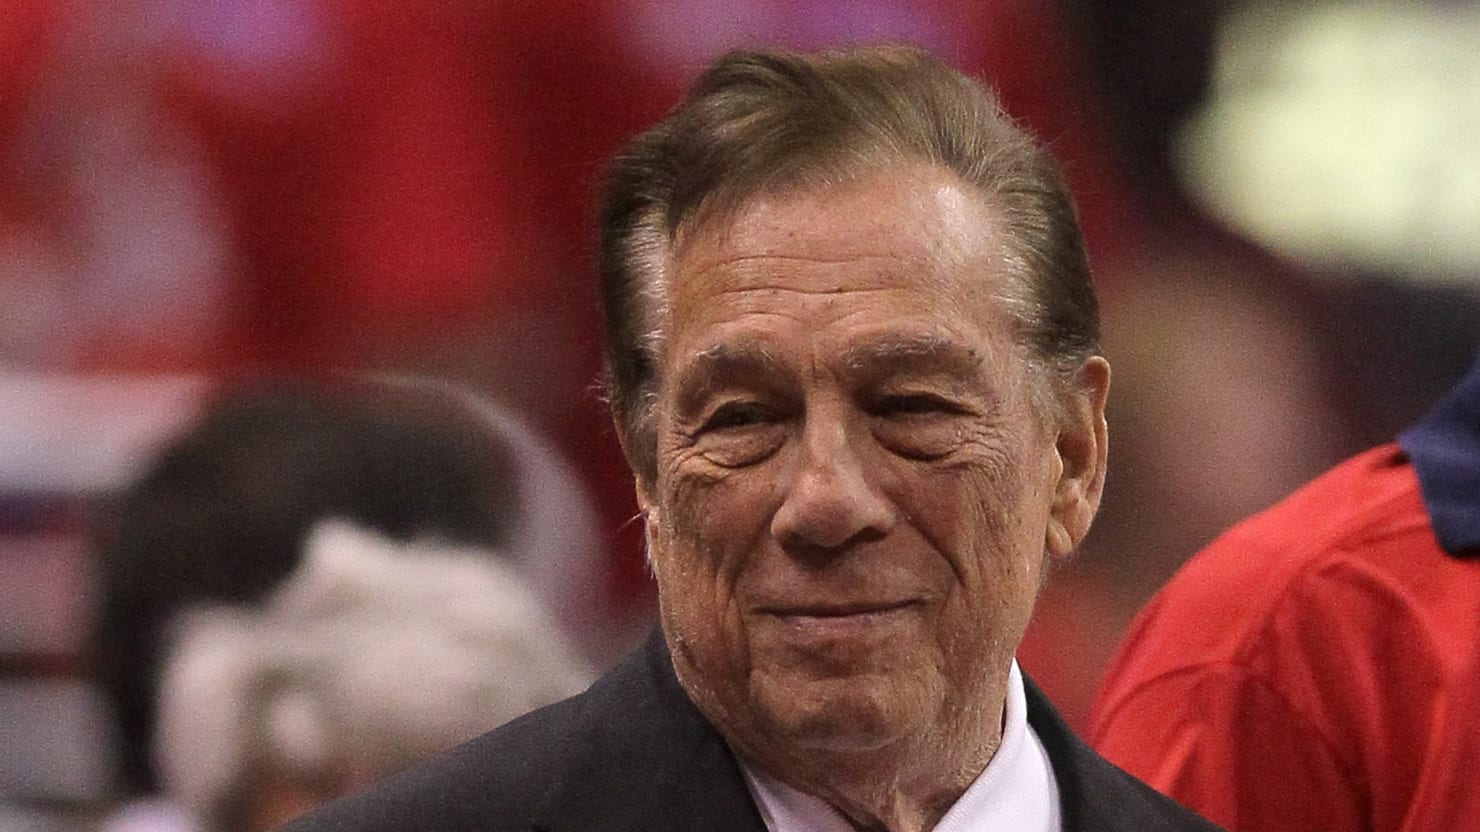 Sterling Drops Lawsuit, Selling Clippers